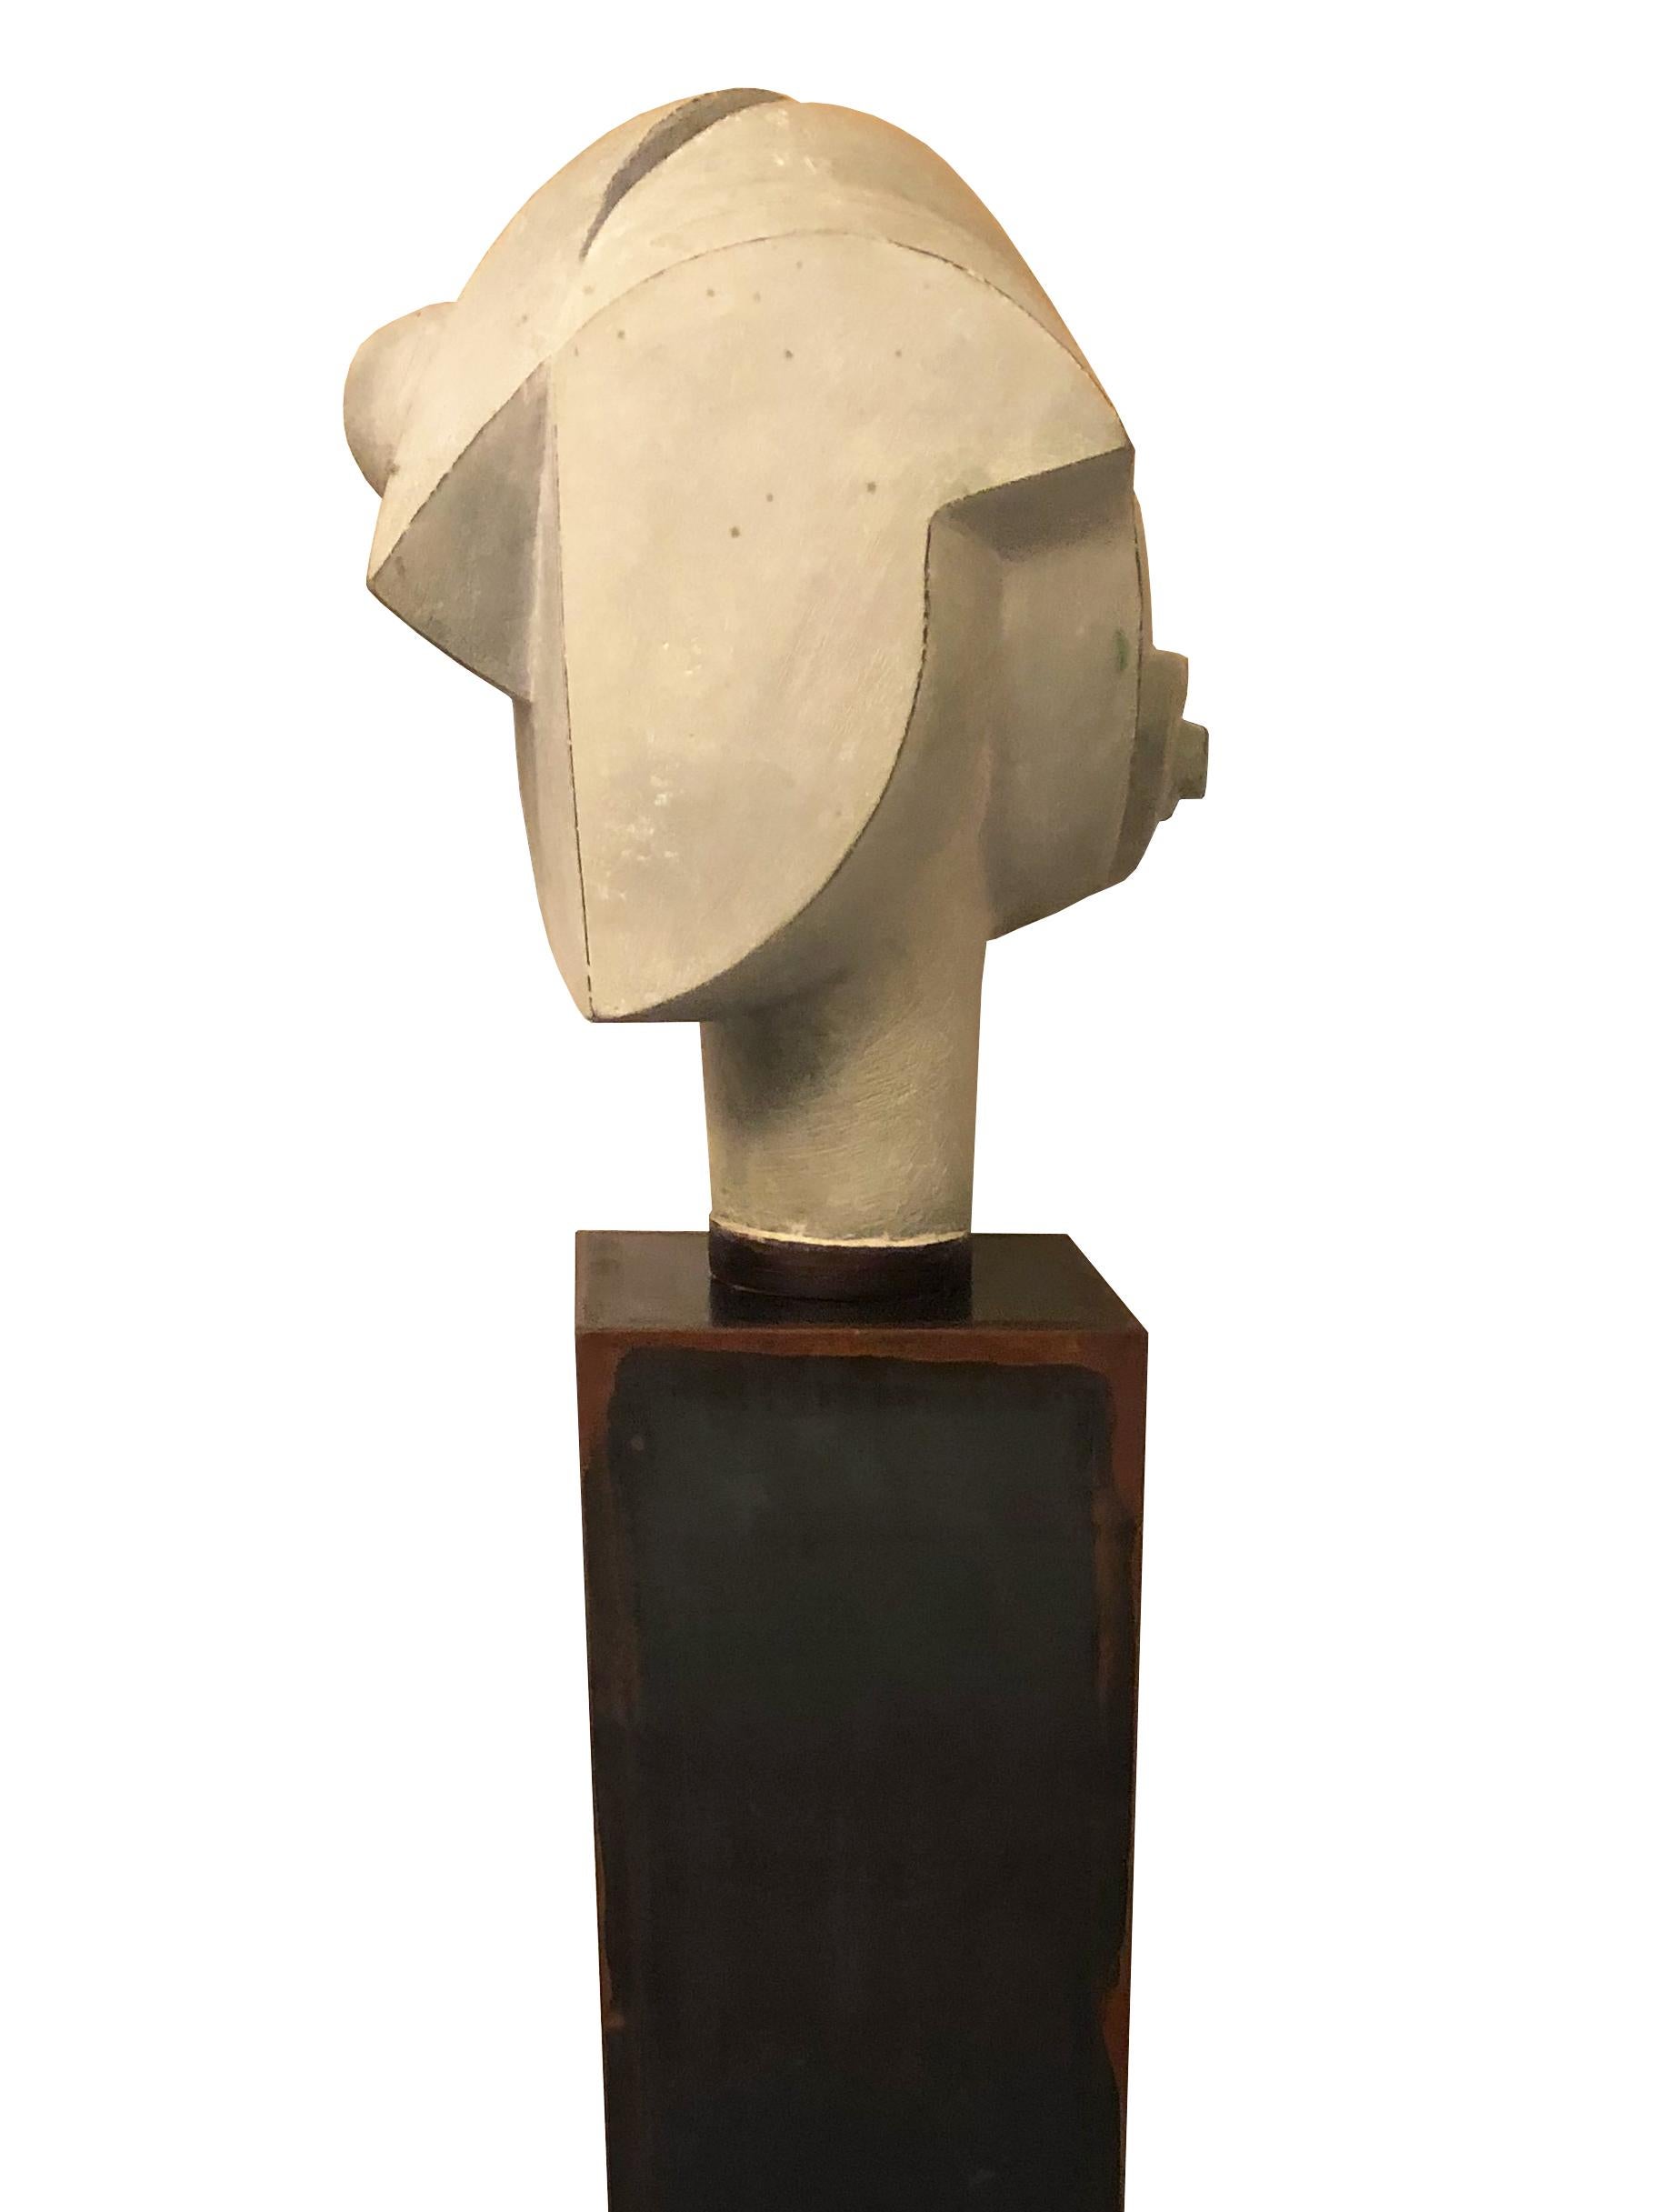 Modern Carmen Otero Cast Bronze with White Patina Sculpture from the Viento Series